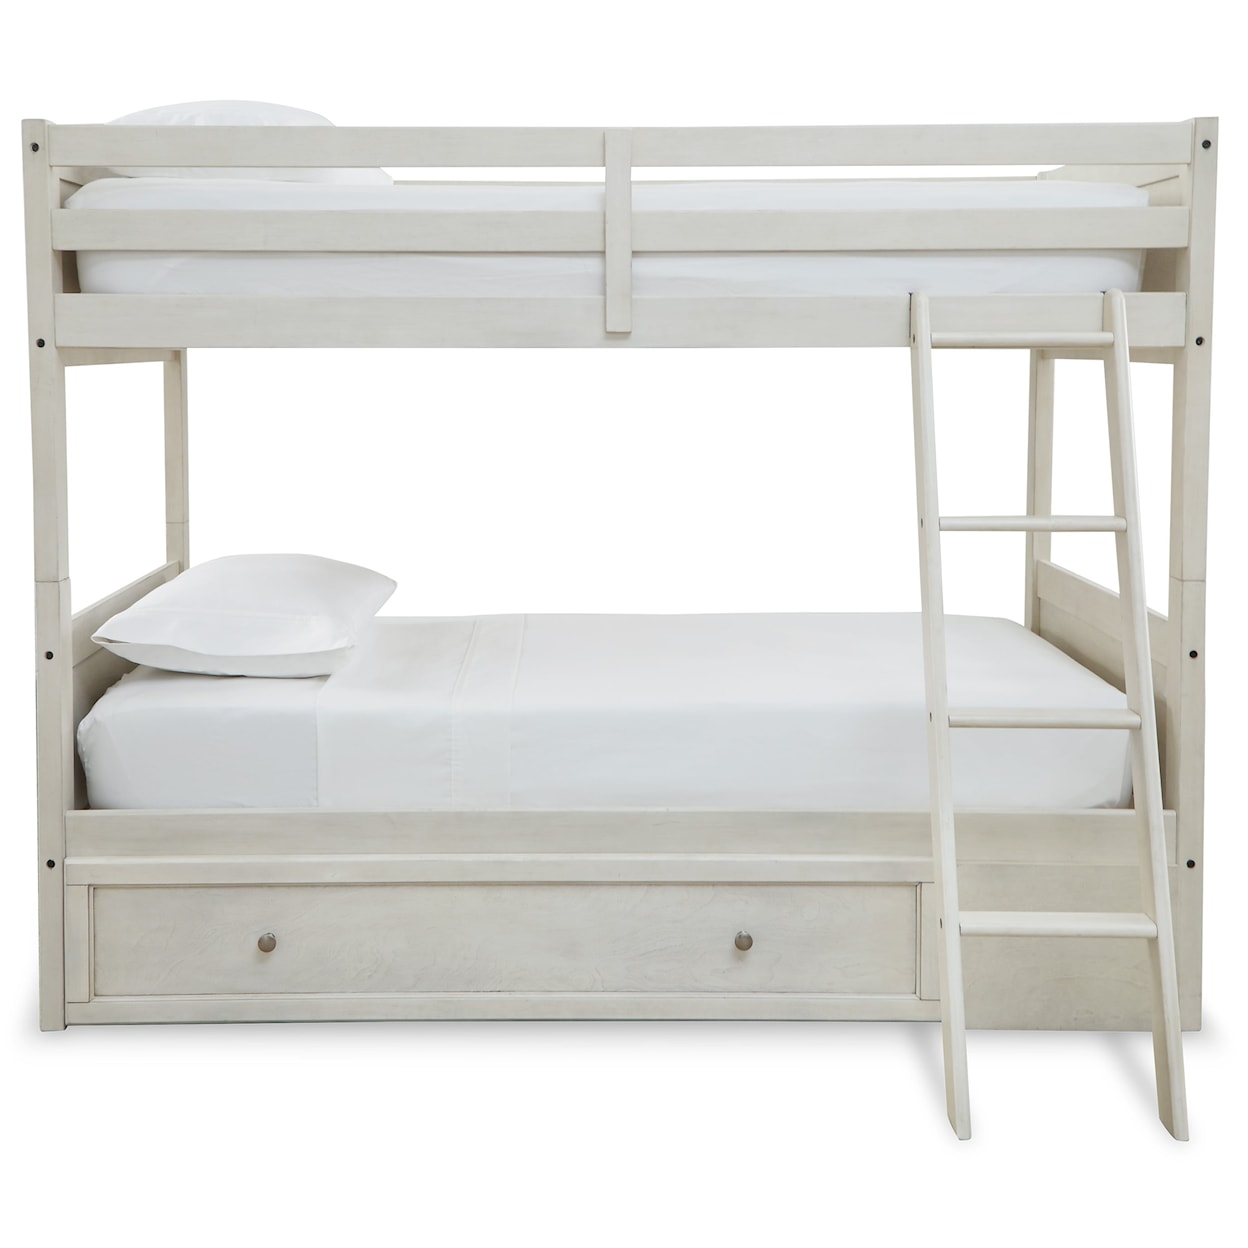 Ashley Signature Design Robbinsdale Twin/Twin Bunk with Storage